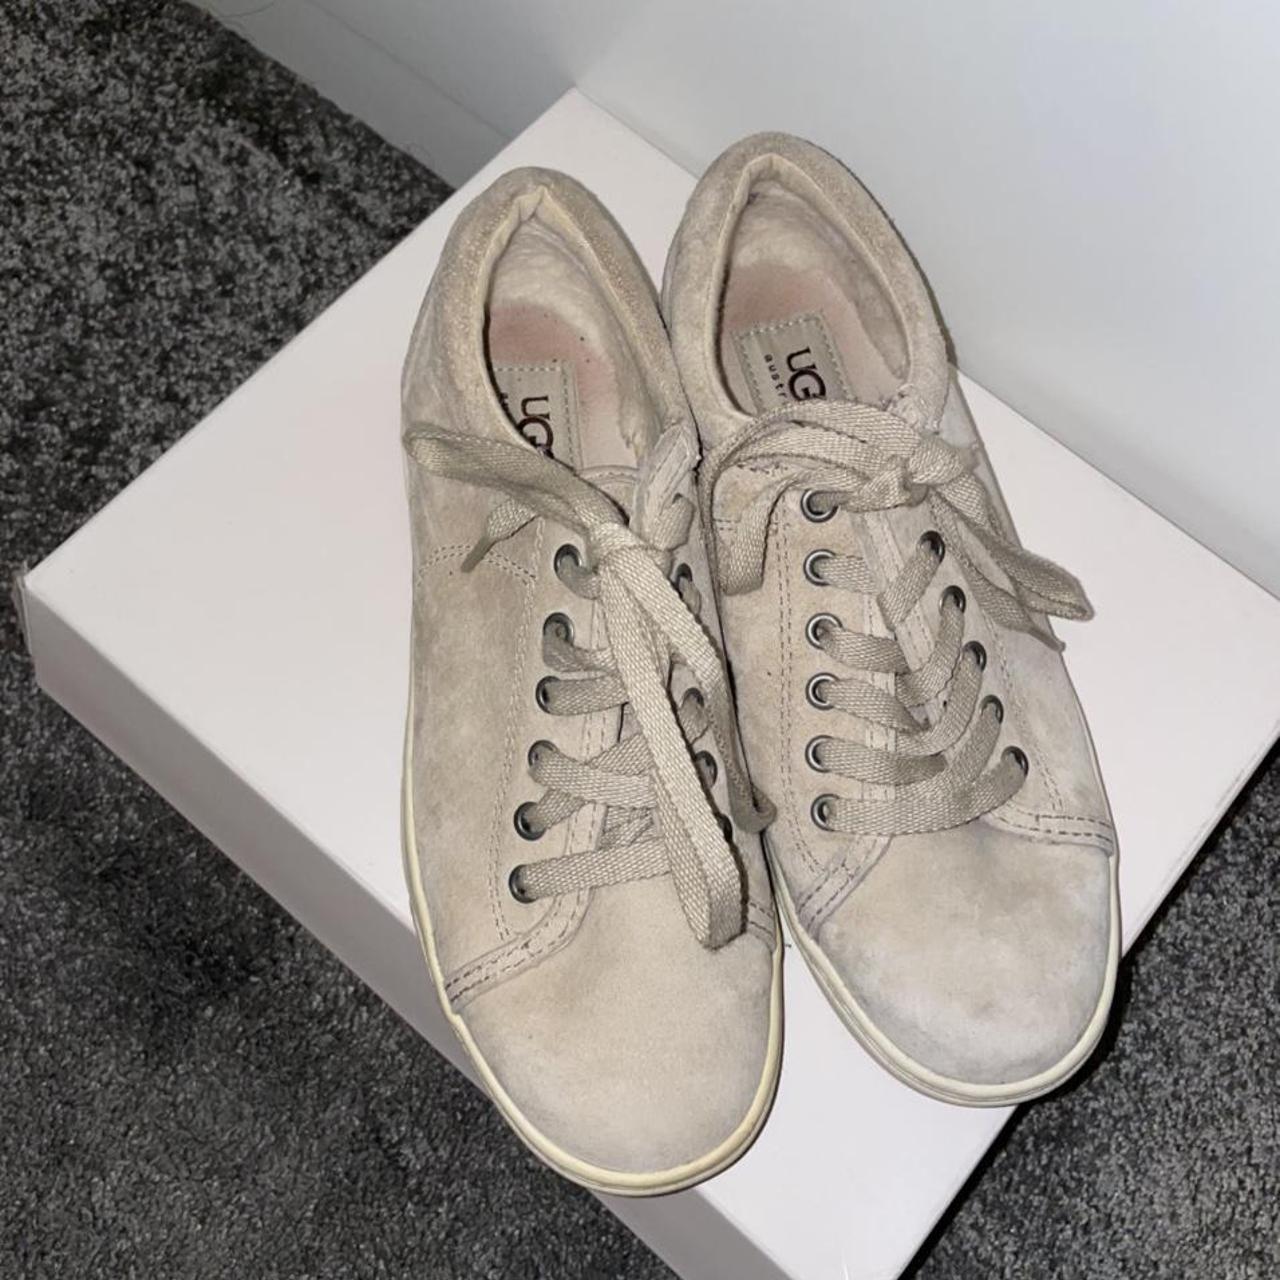 Product Image 1 - ✨Beige UGG trainers✨

Beautiful beige coloured